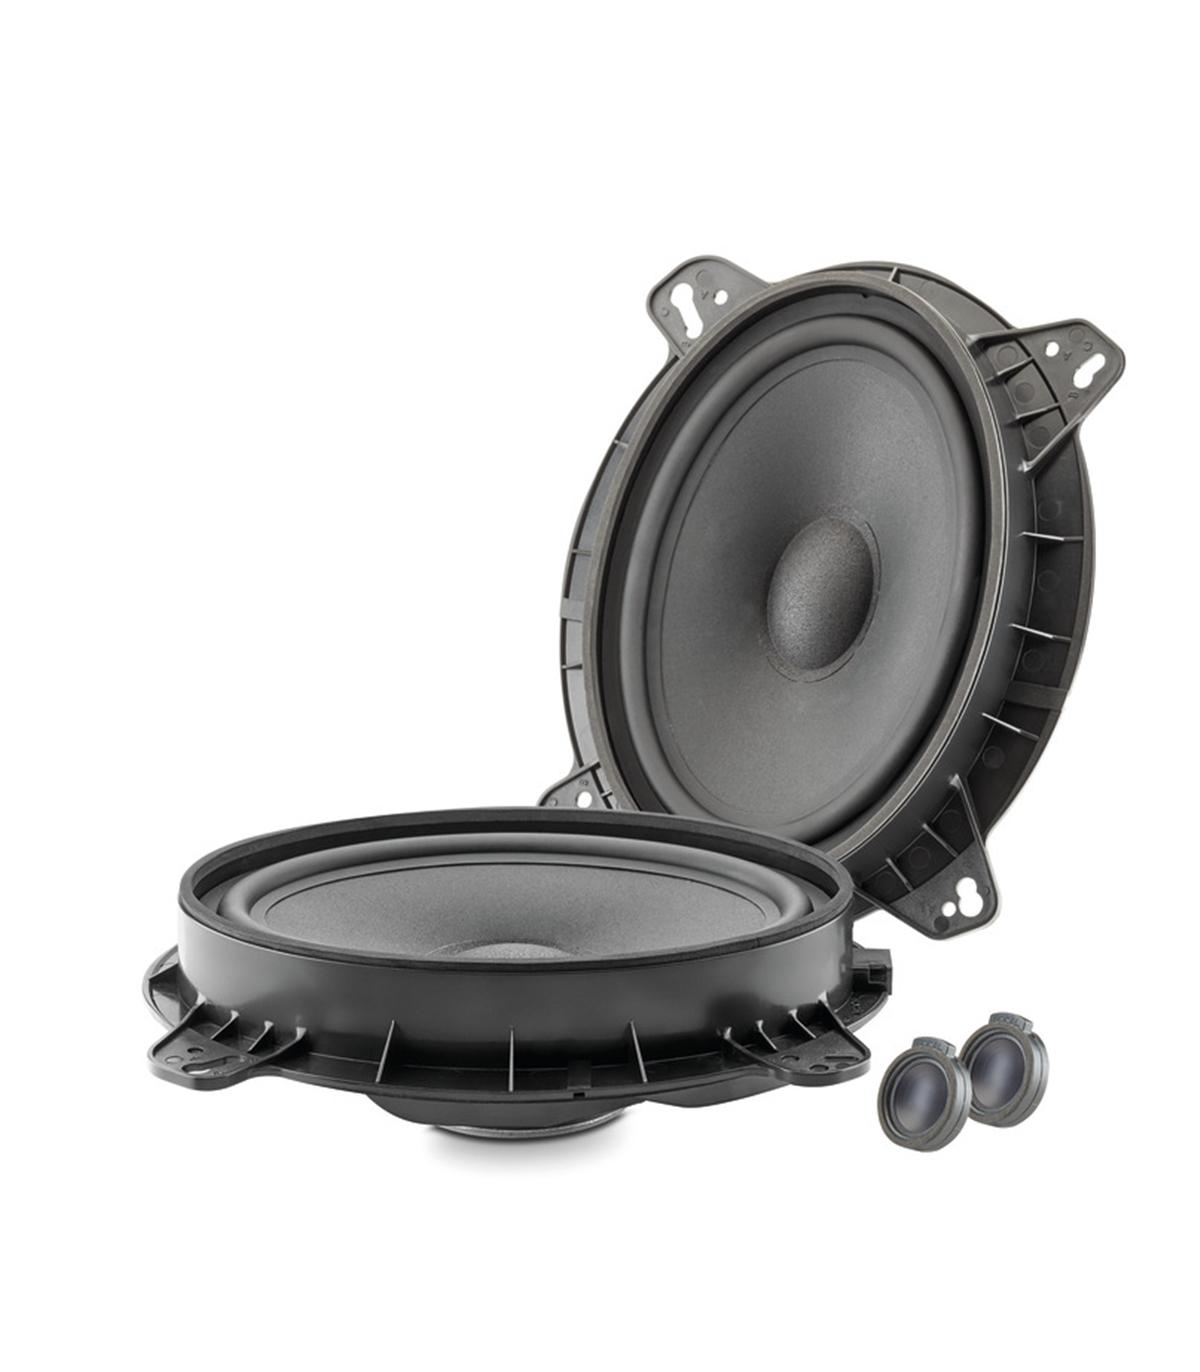 Focal - IS TOY690